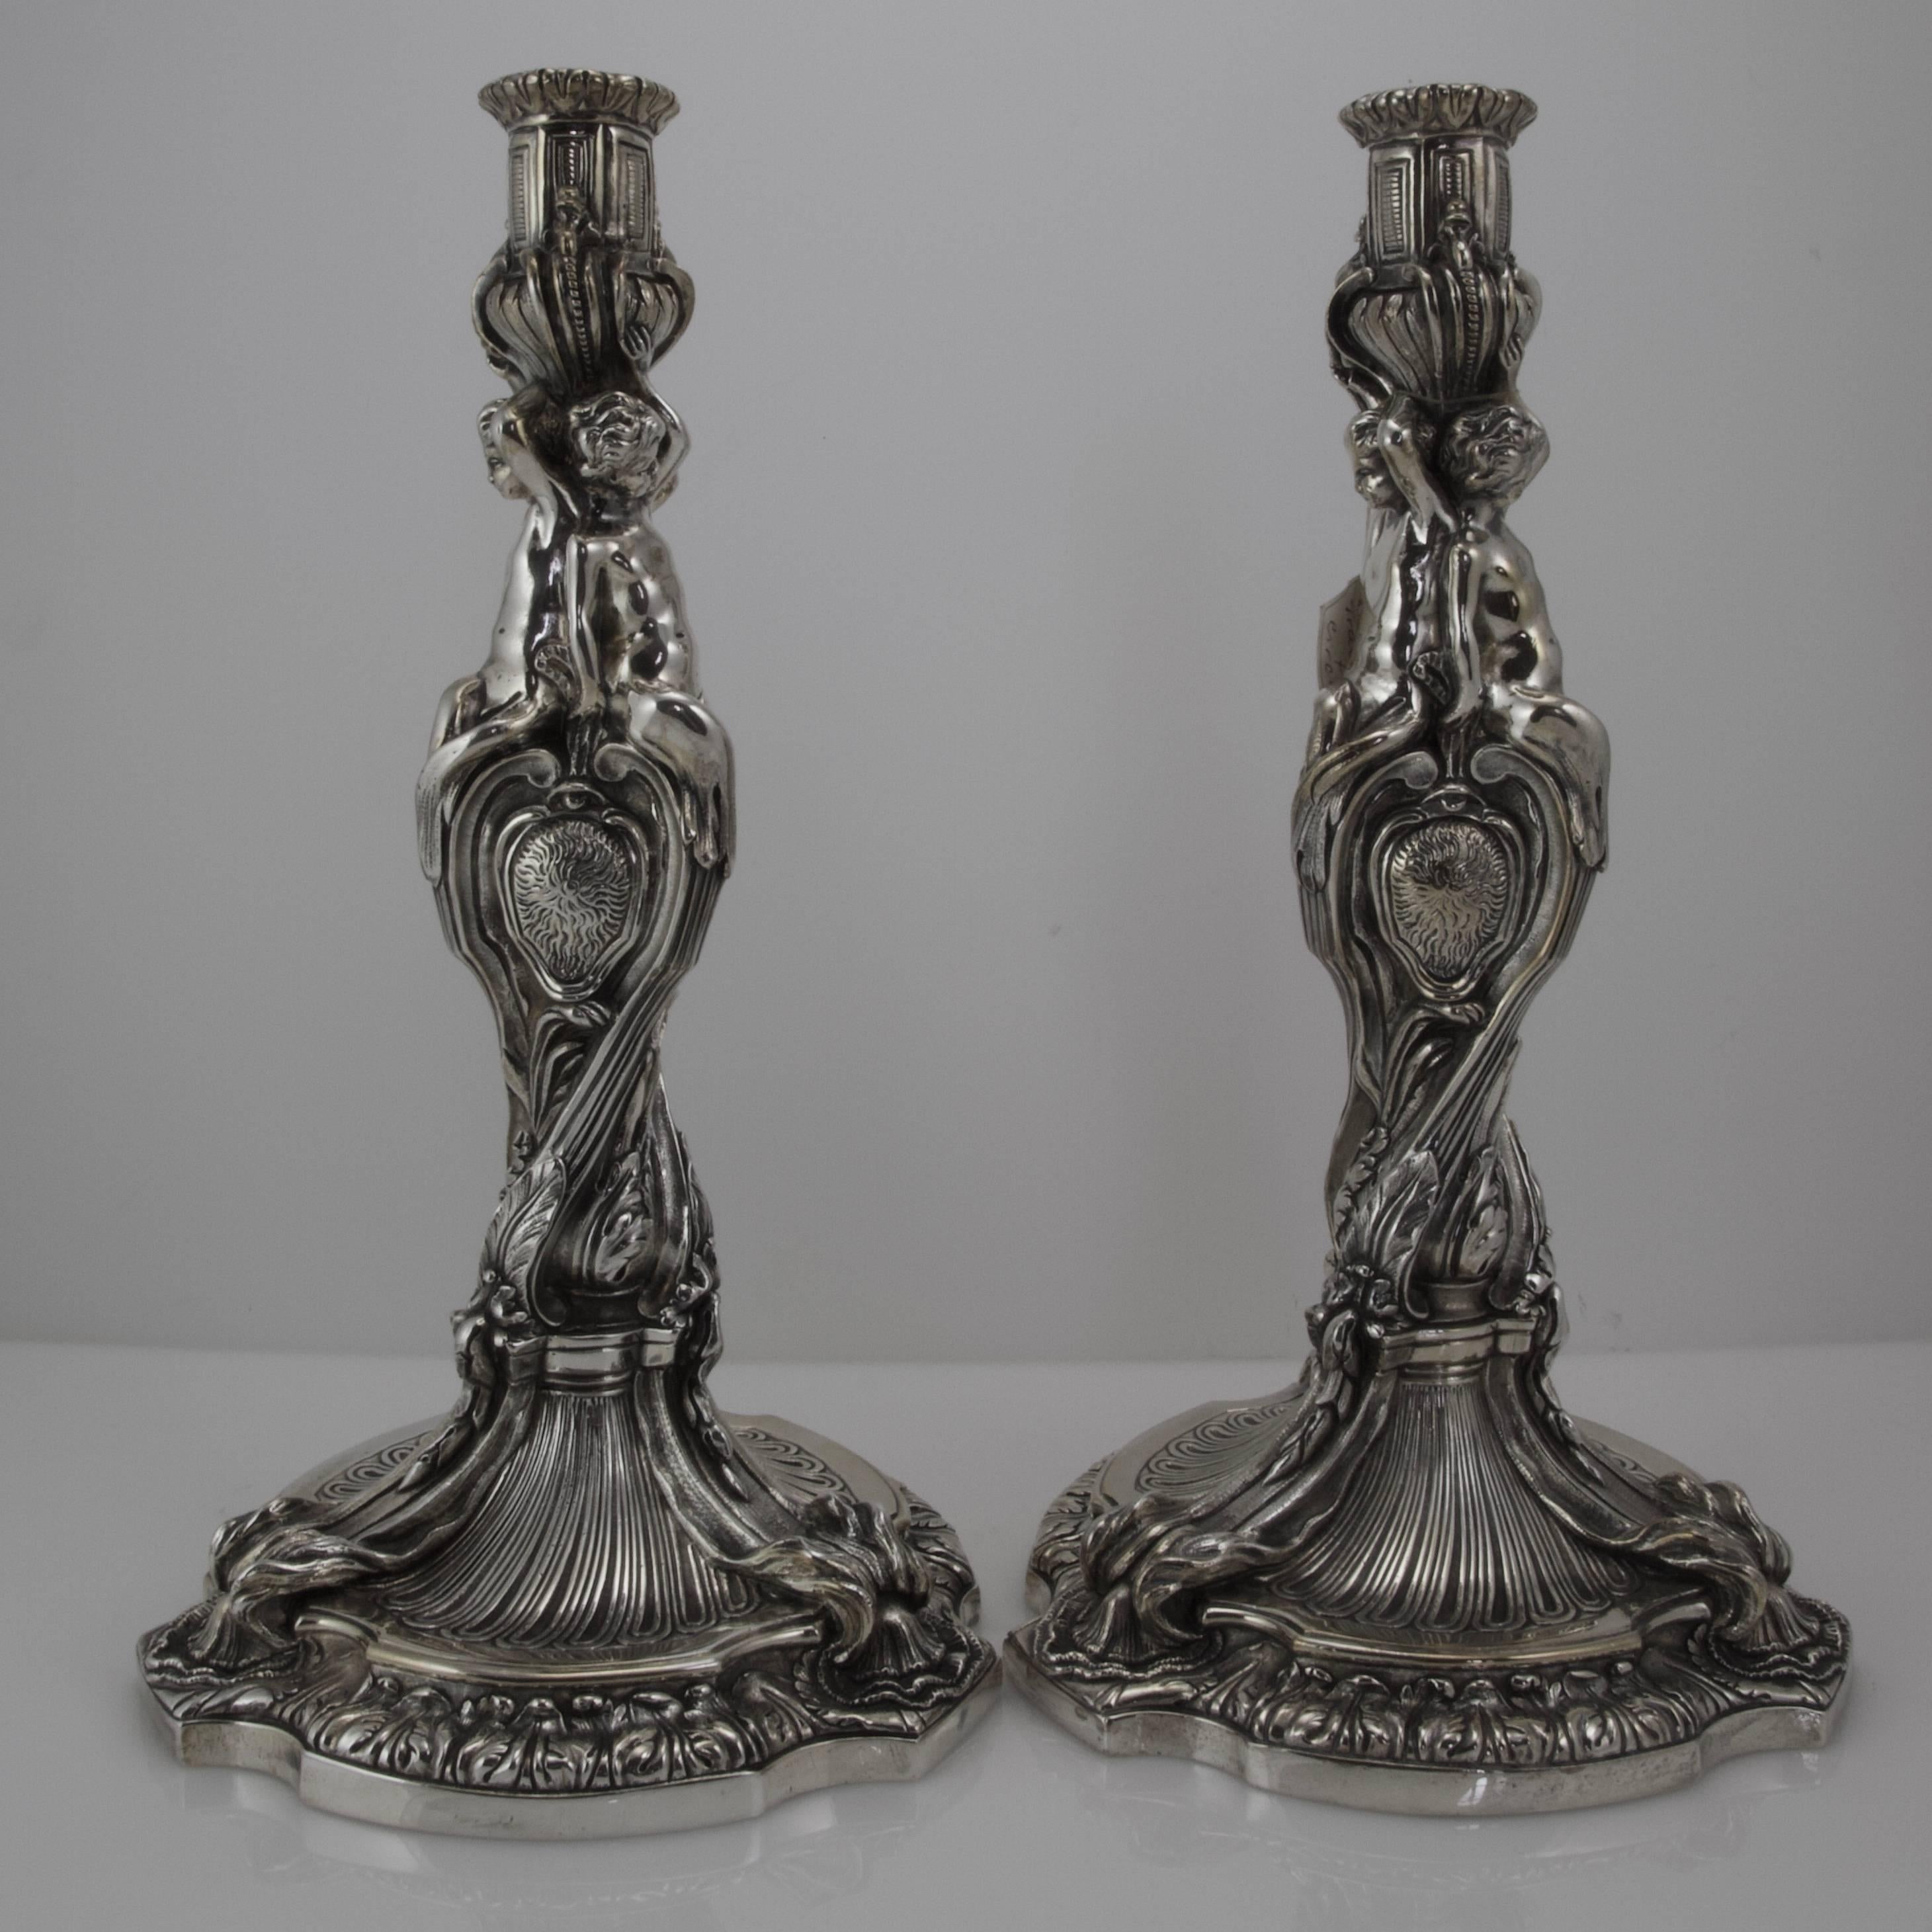 Tallness pair of candlesticks in bronze and silver plate showing all the decorative register of the Regency style. Baluster shaped form with swirling stem onto a shaped base. Three puttis as the atlantean supporting the lights. Three different